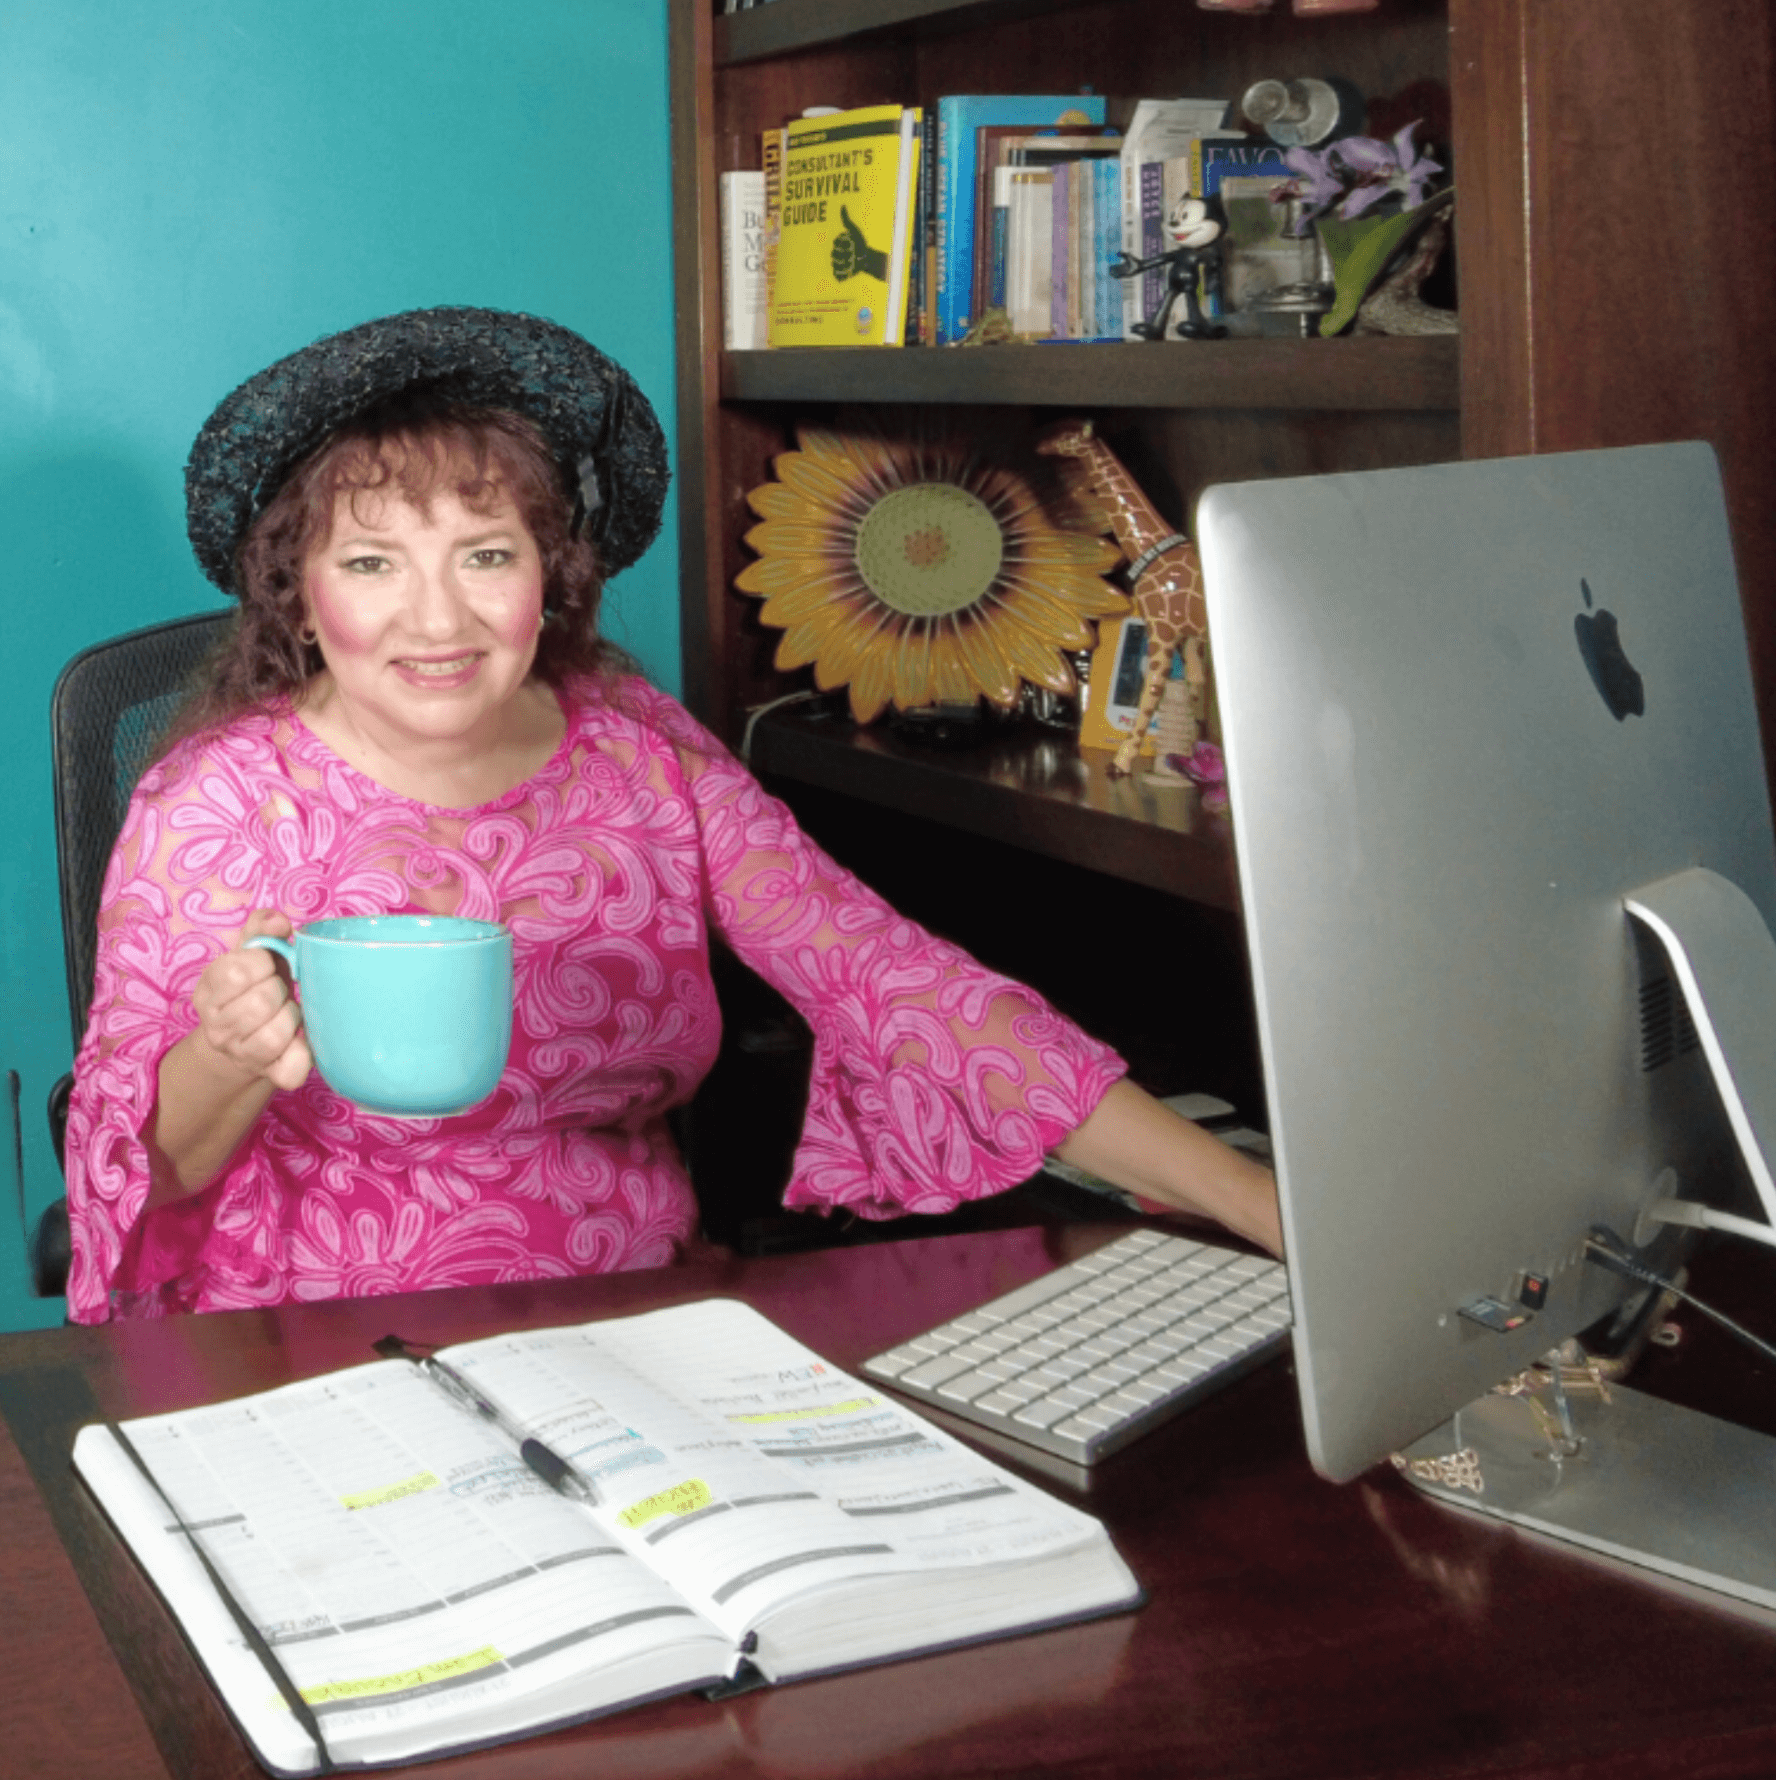 Gracie Ruth, LinkedIn Branding Expert and Personal Branding Coach, working at her desk with planner, computer, and coffee mug, in her teal-colored office with a sunflower on the wall